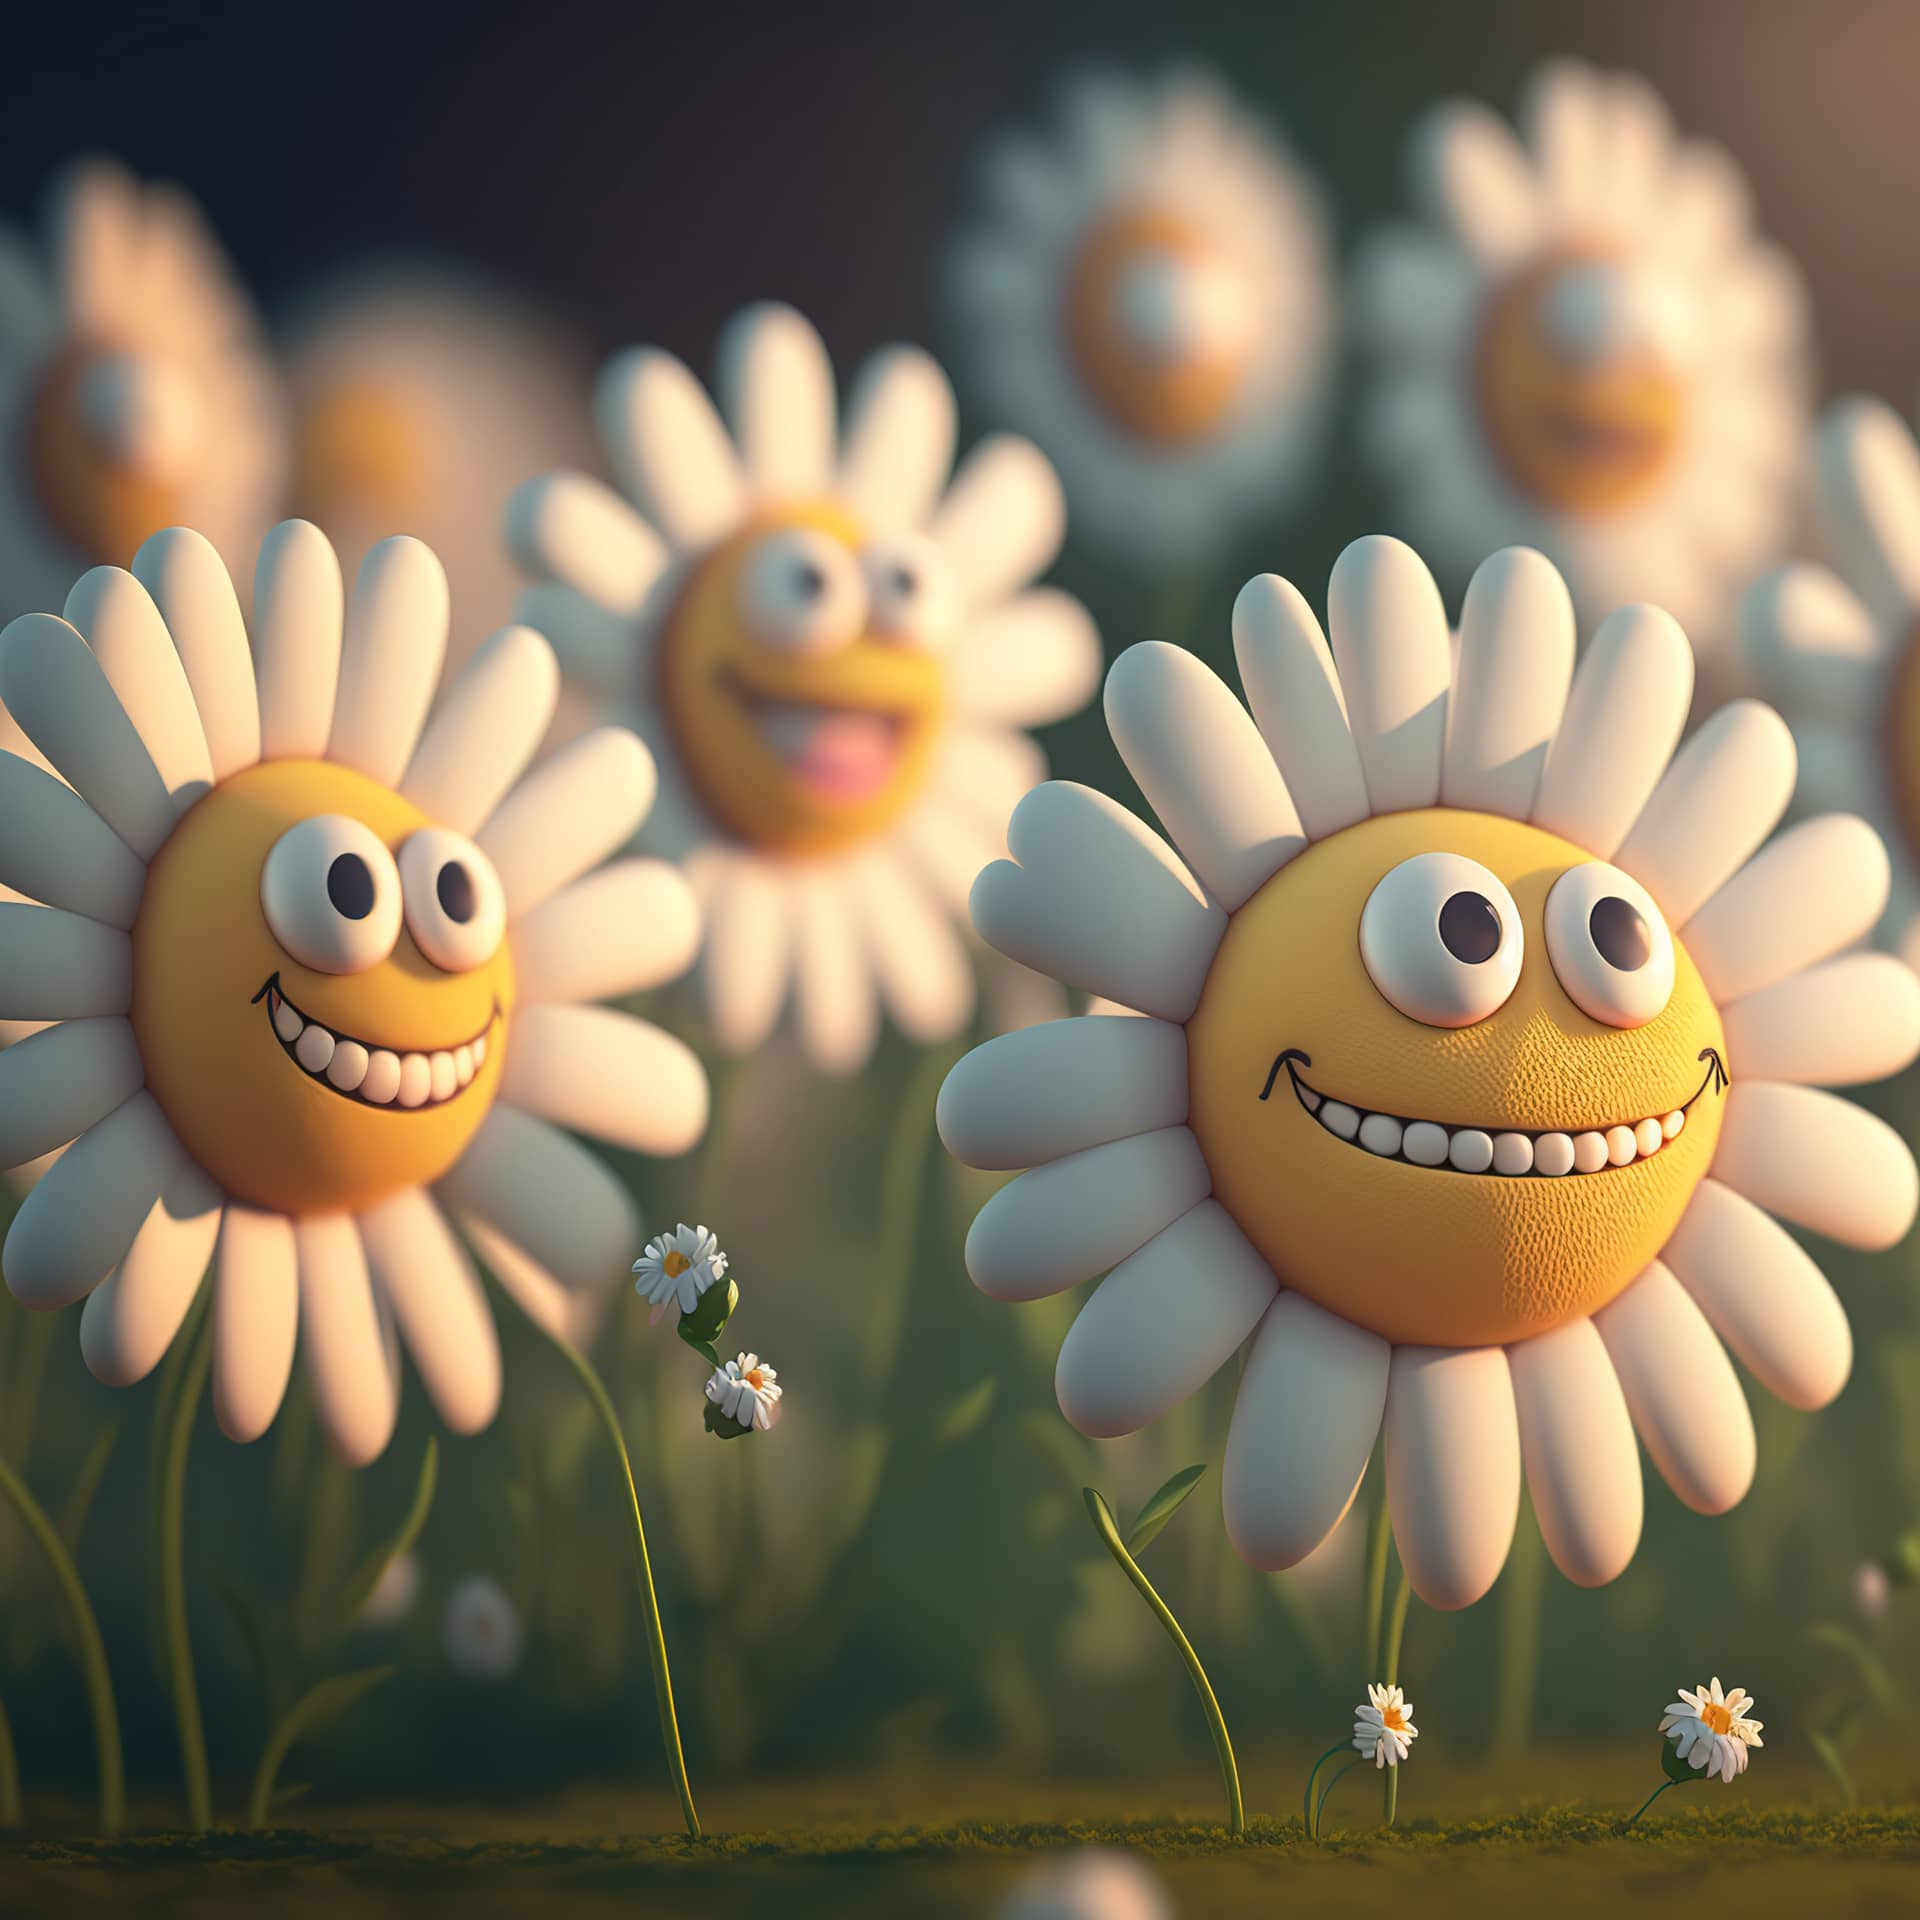 Daisy flowers with cartoon funny smiling faces